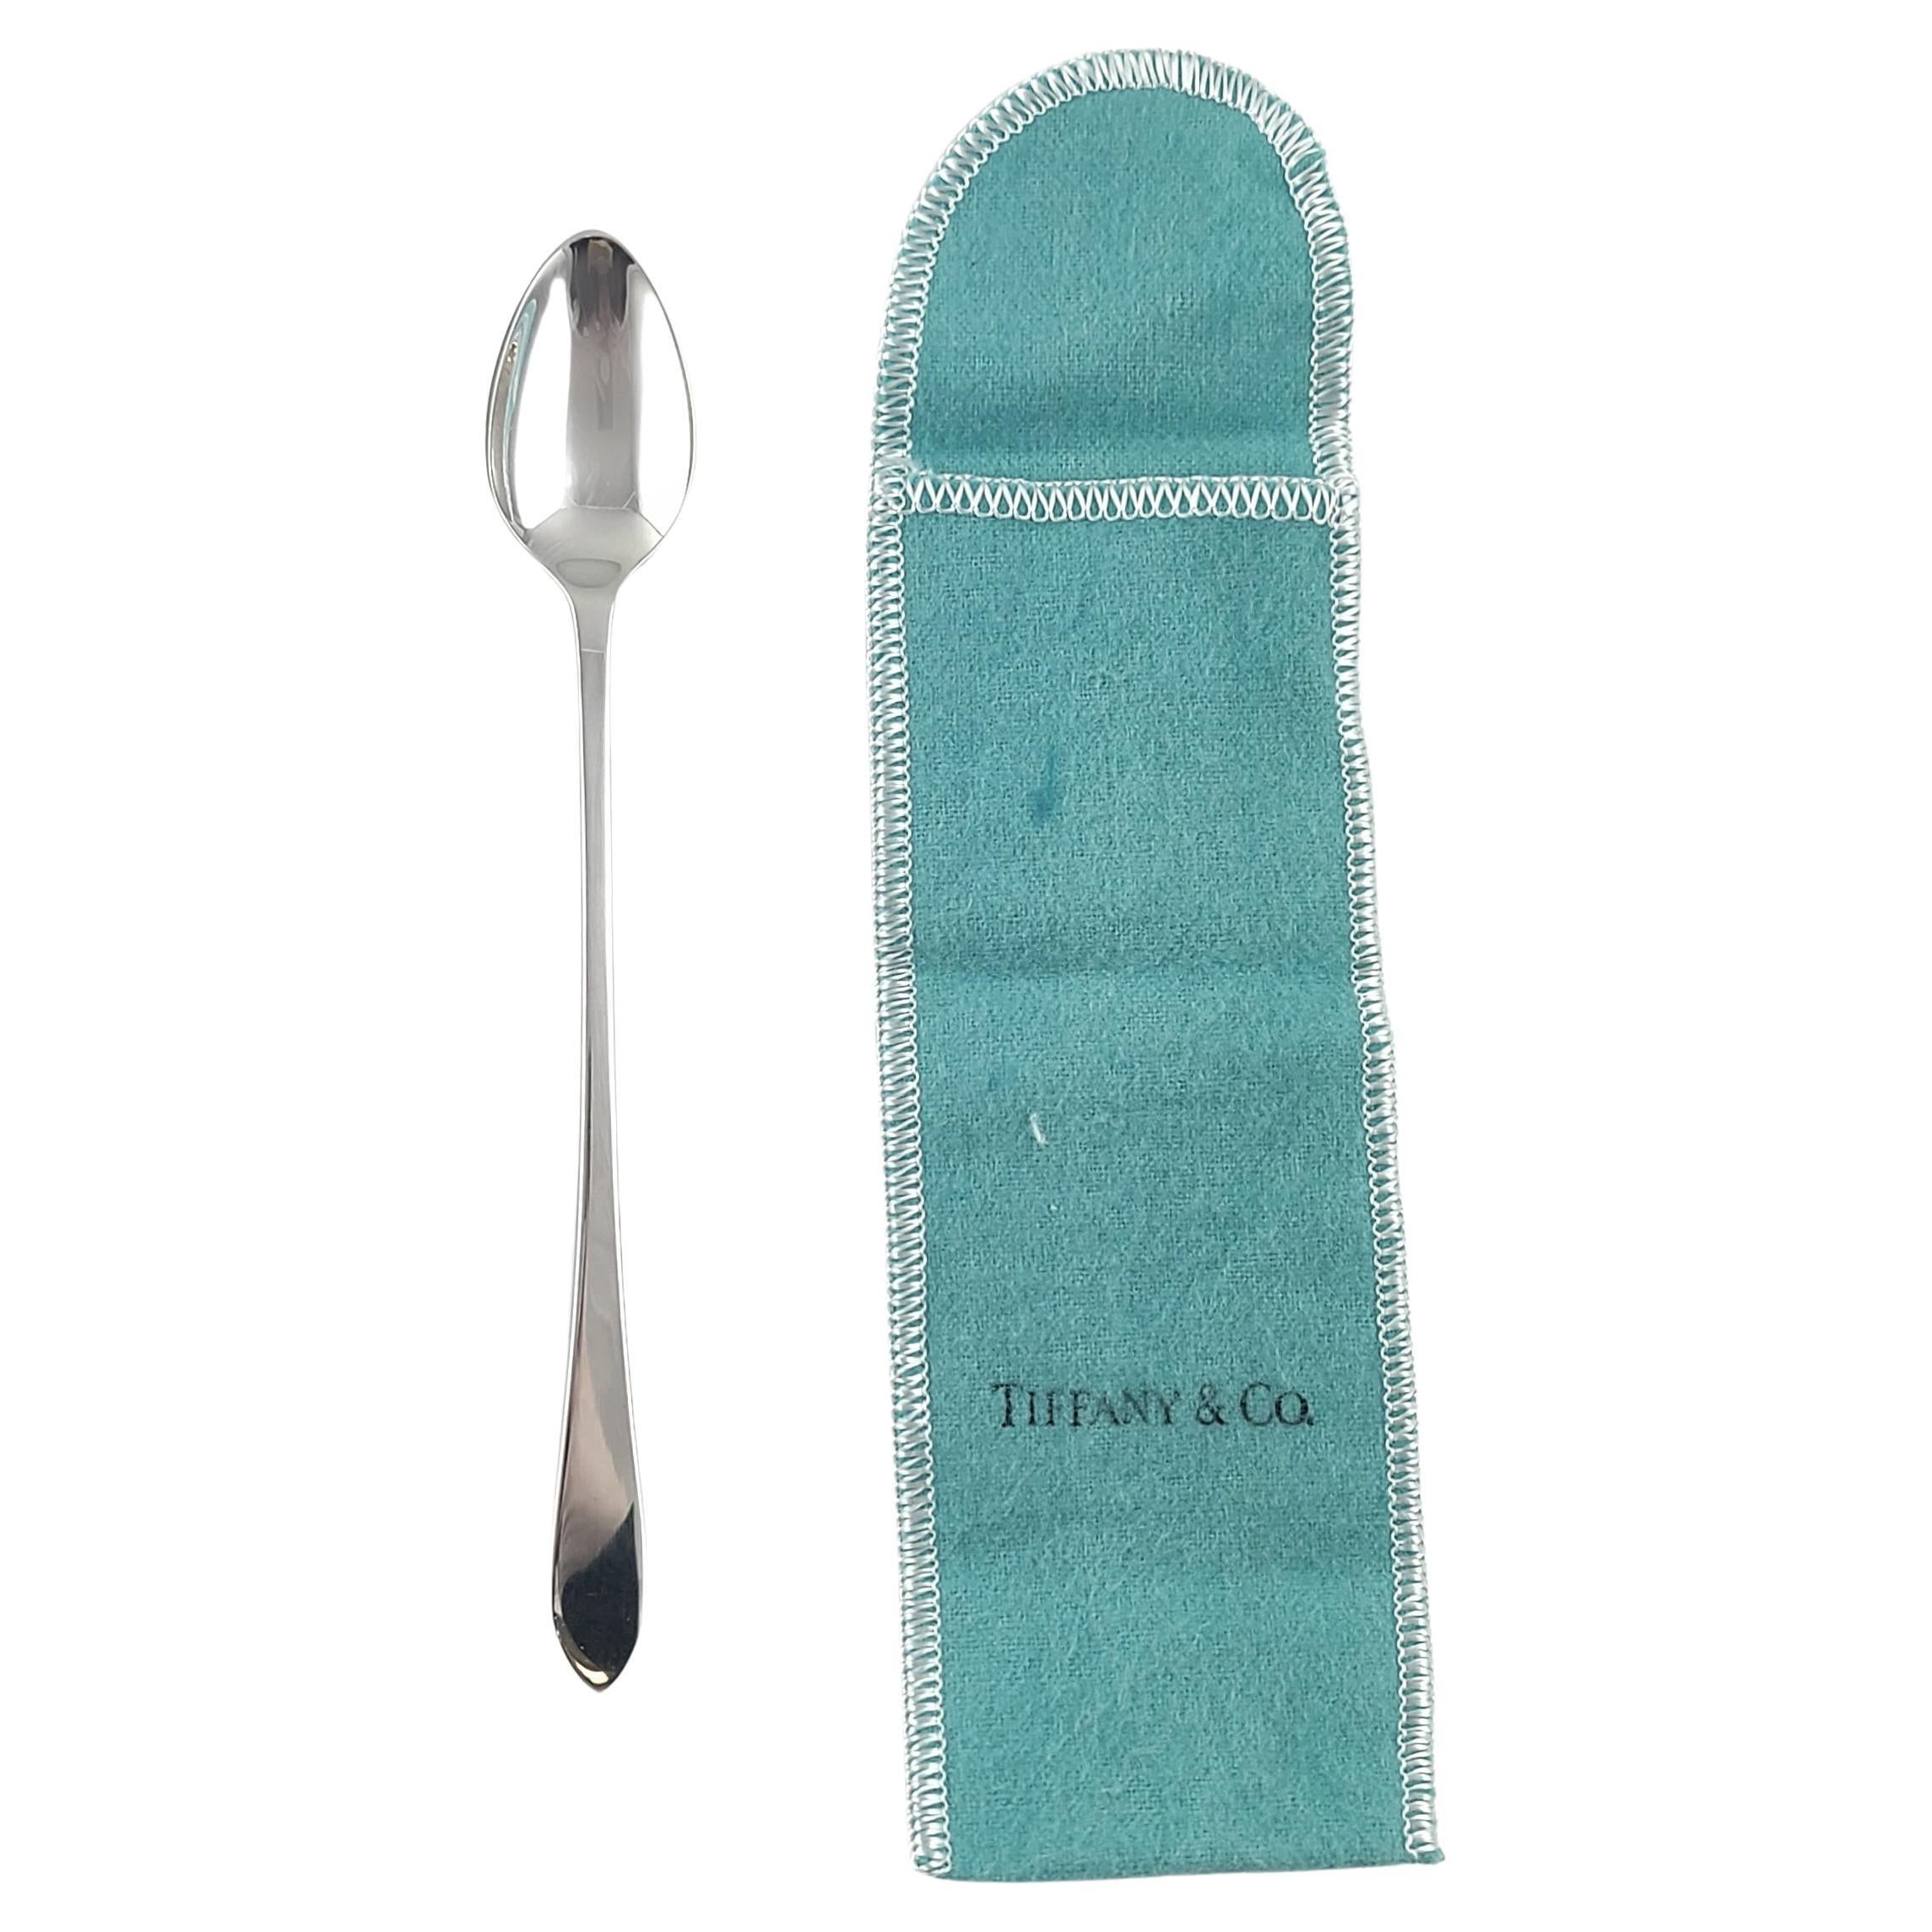 https://a.1stdibscdn.com/tiffany-co-sterling-silver-faneuil-baby-feeding-spoon-with-pouch-for-sale/j_12103/j_149937721646672854338/j_14993772_1646672854992_bg_processed.jpg